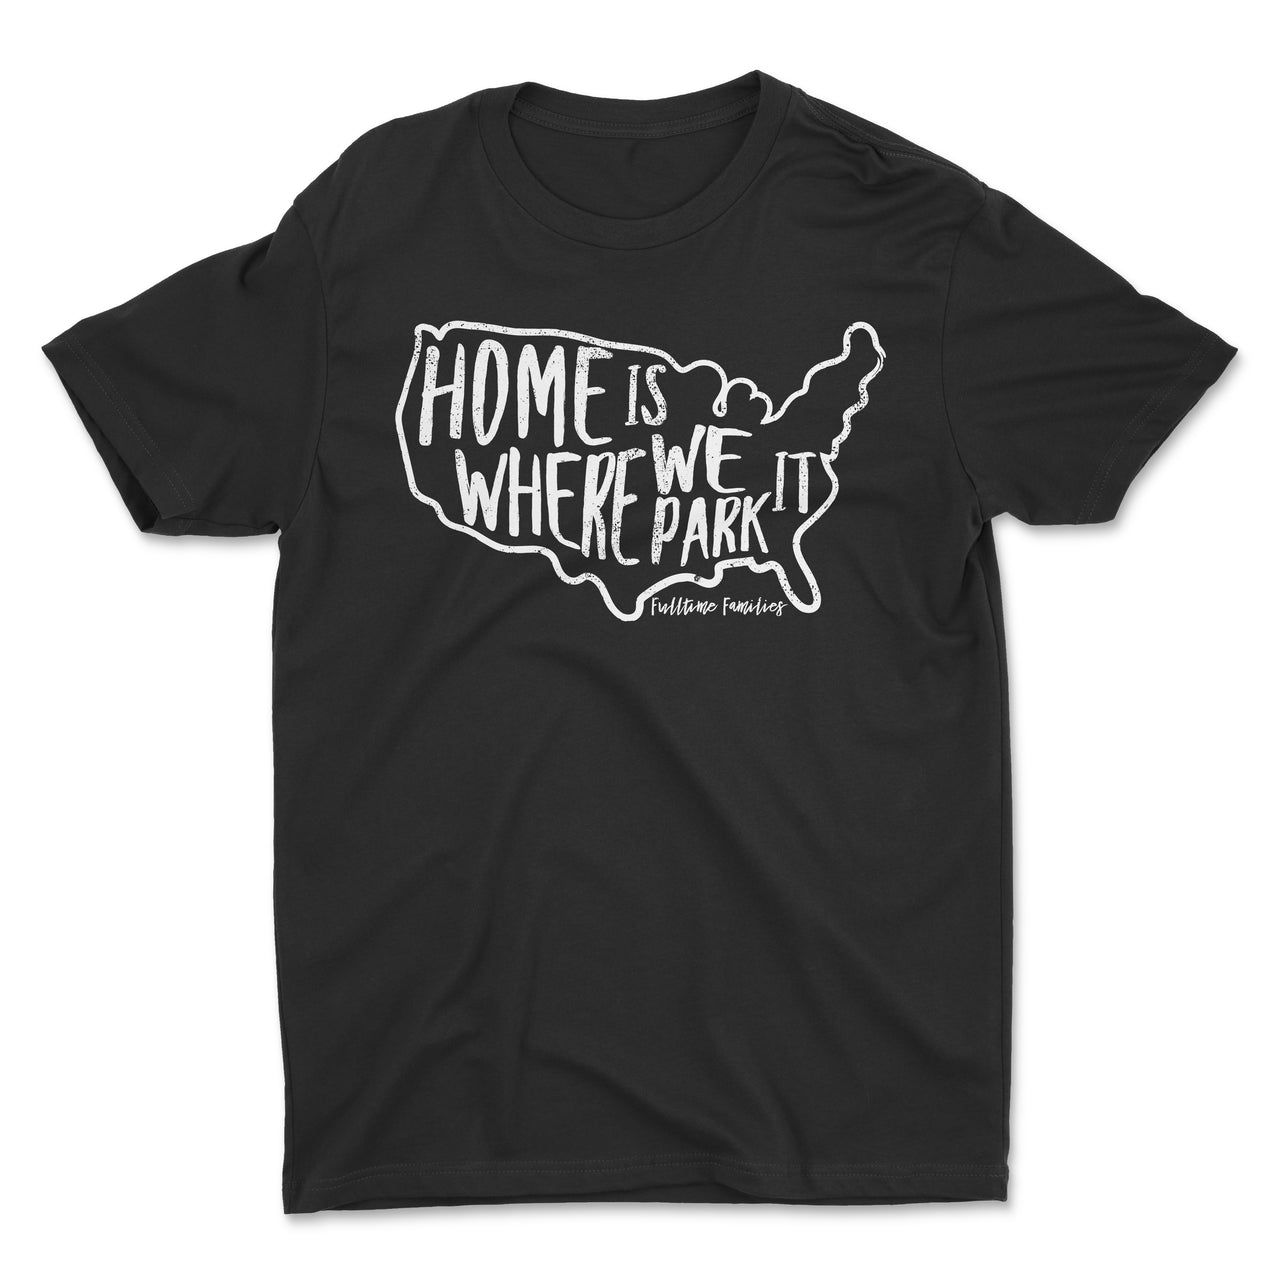 FTF Home is Where We Park It Kids Shirt